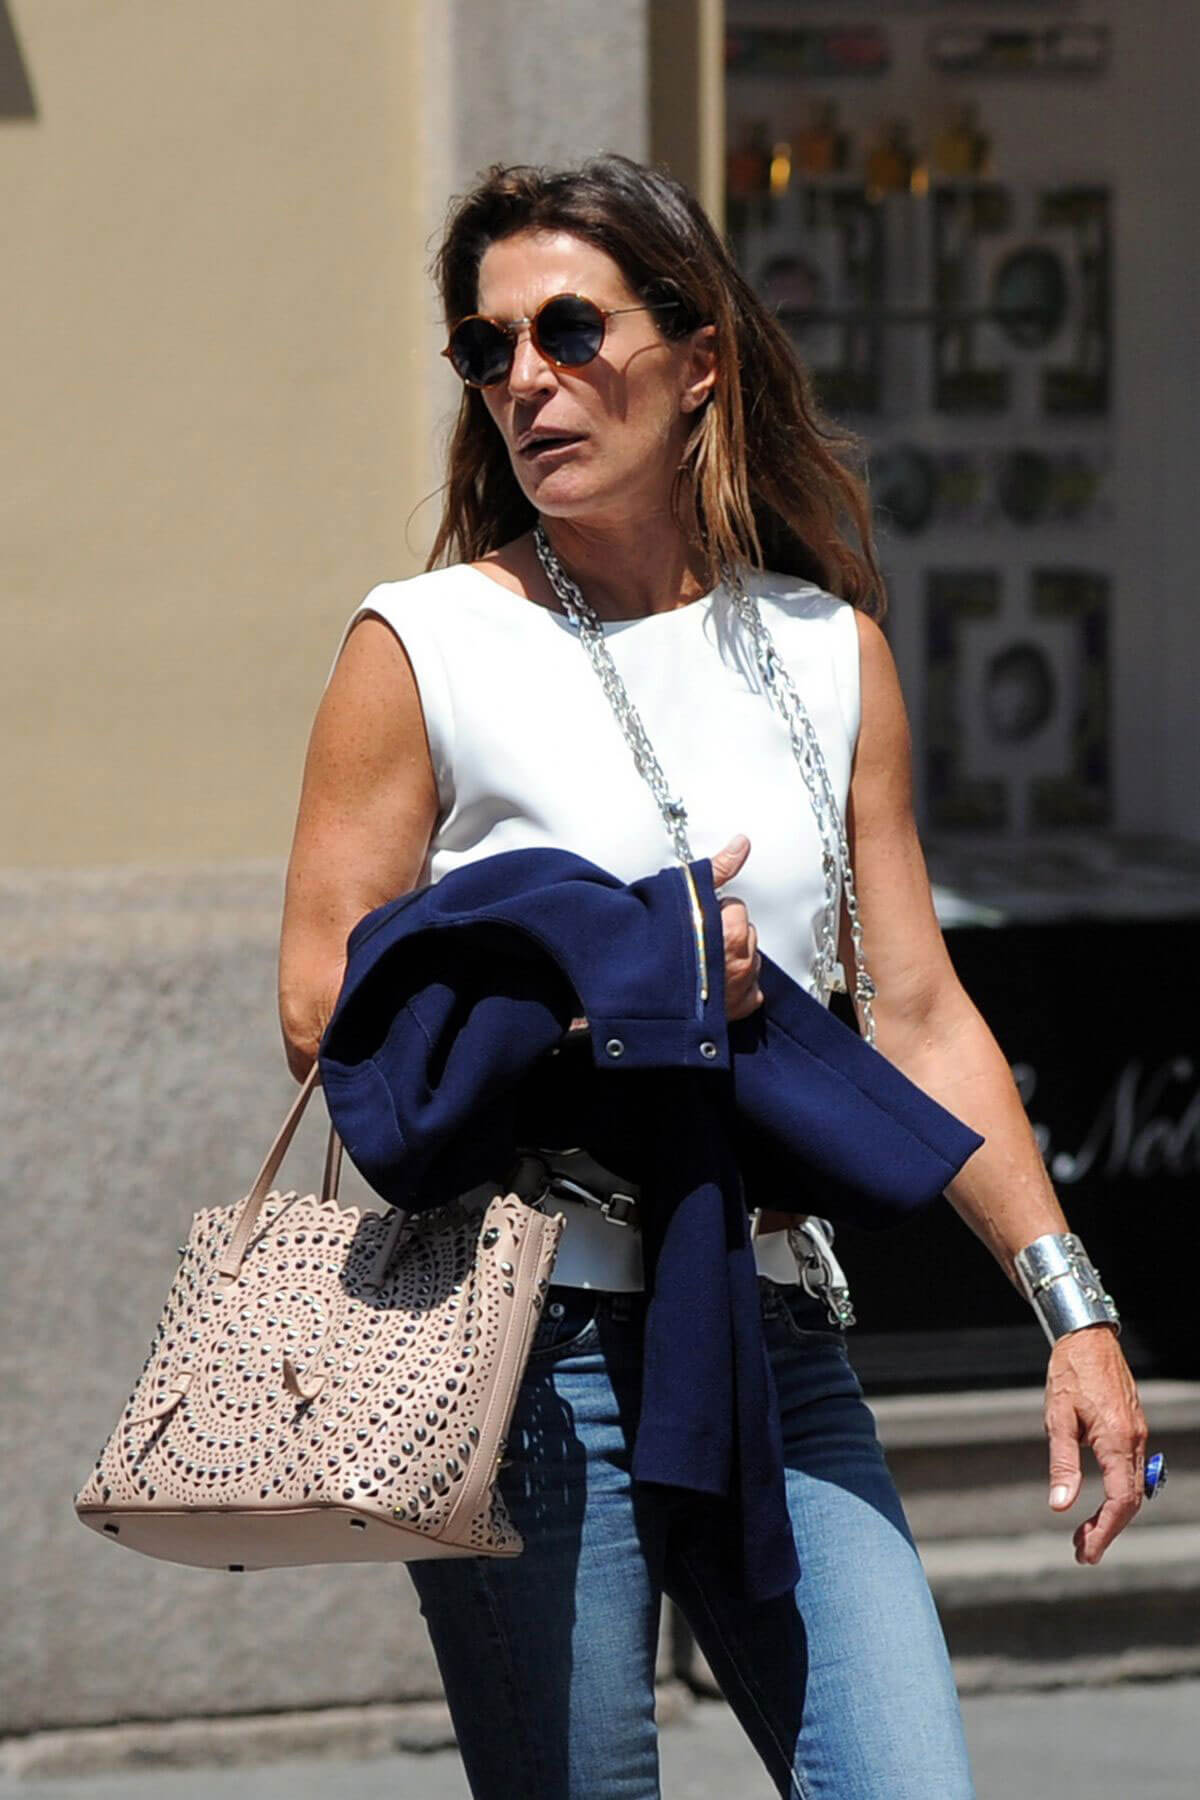 Fiona Swarovski Out and About in Milan